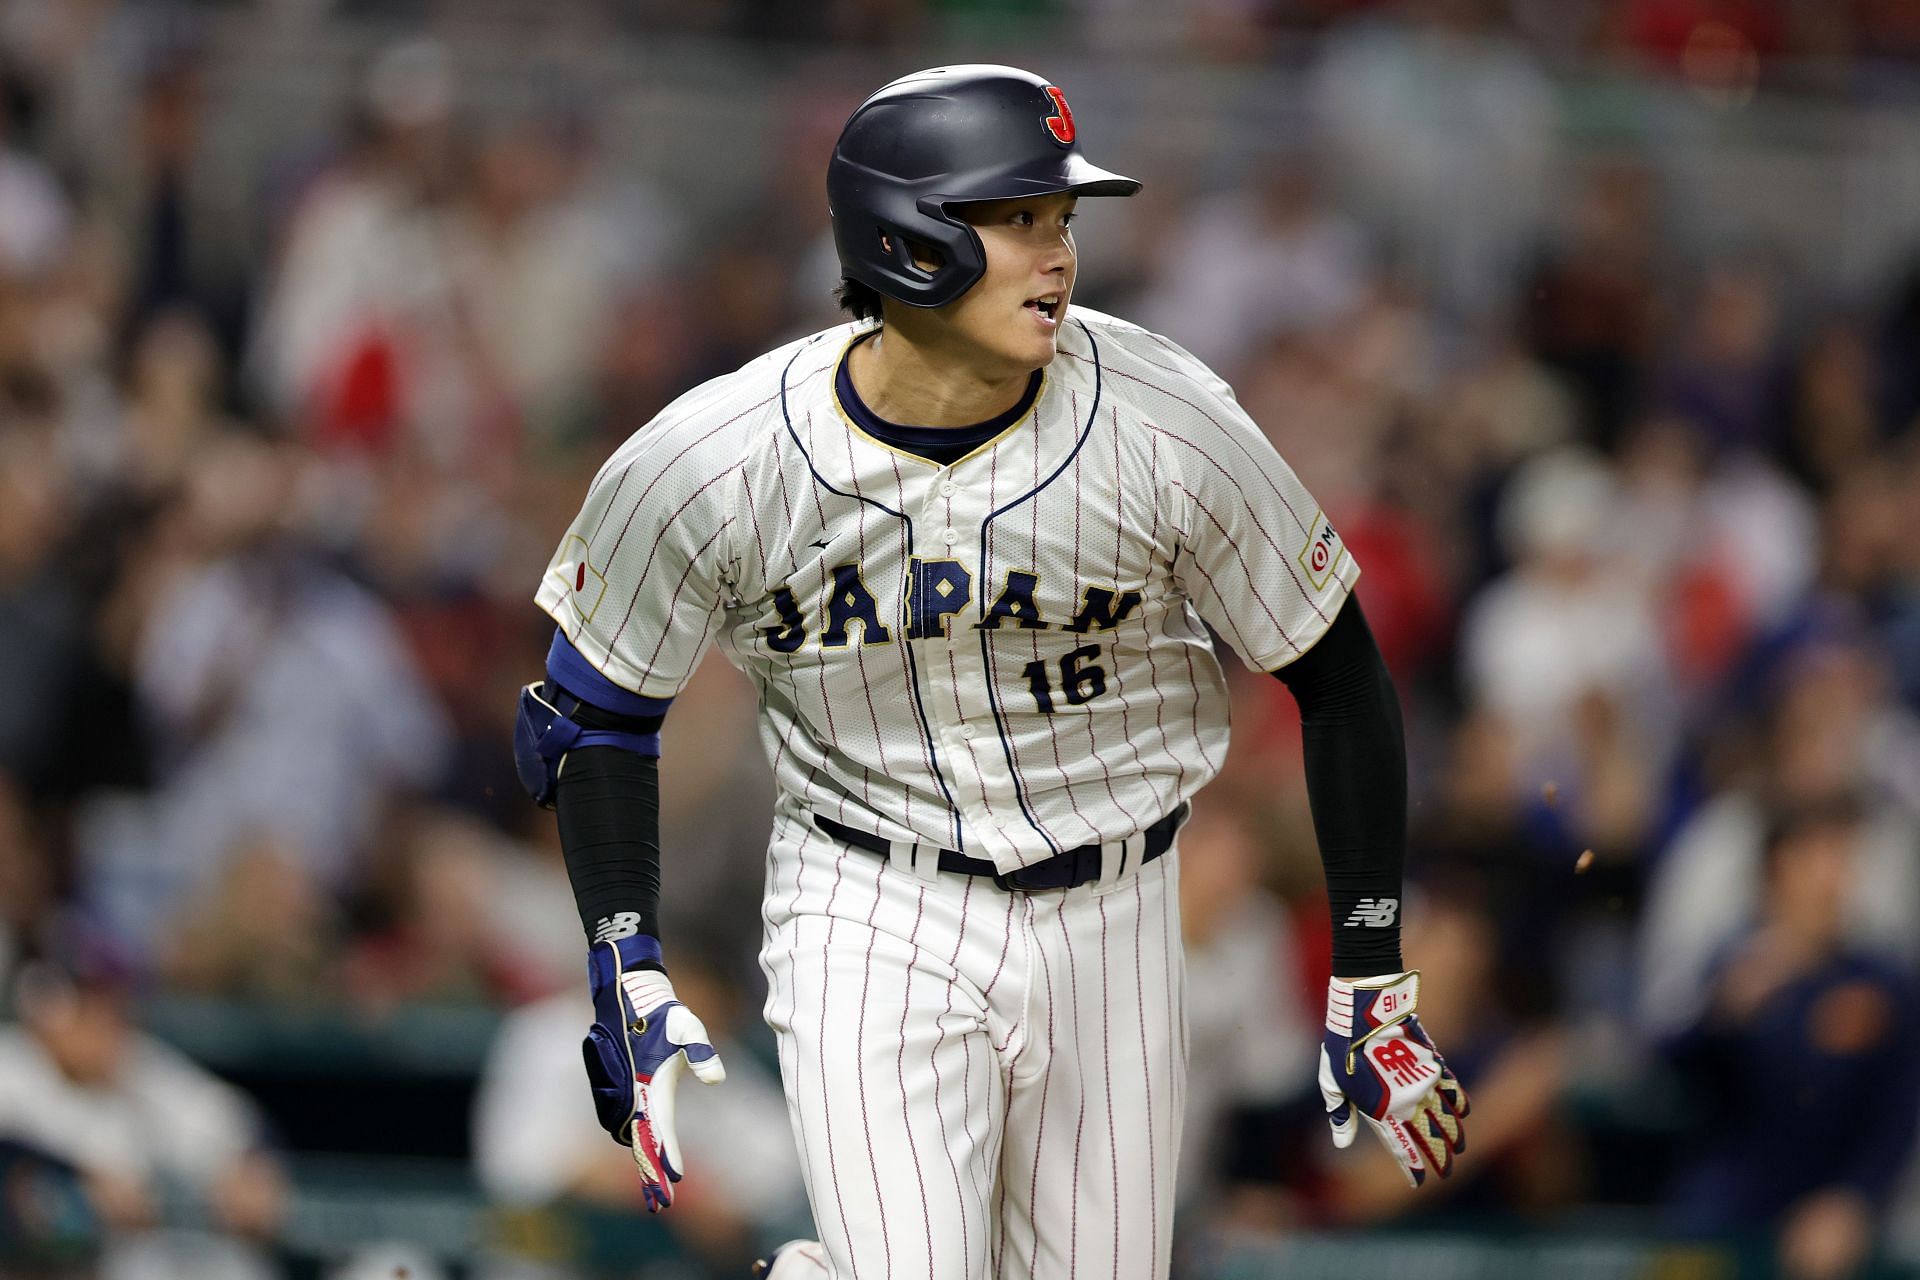 Shohei Ohtani has been a standout performer for Japan in the WBC